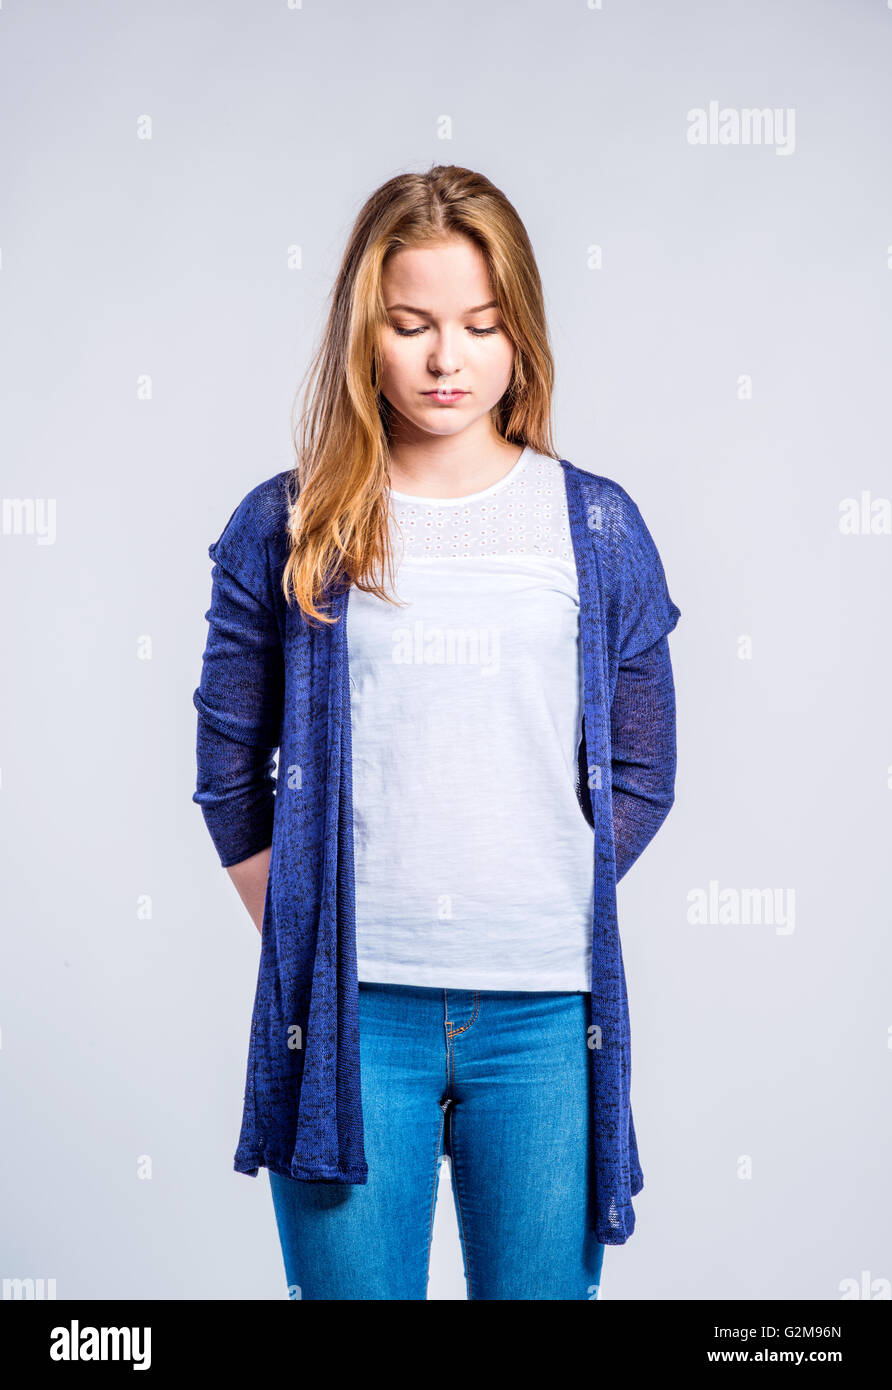 Teenage girl in jeans and long blue sweater, young woman, studio shot on gray background Stock Photo